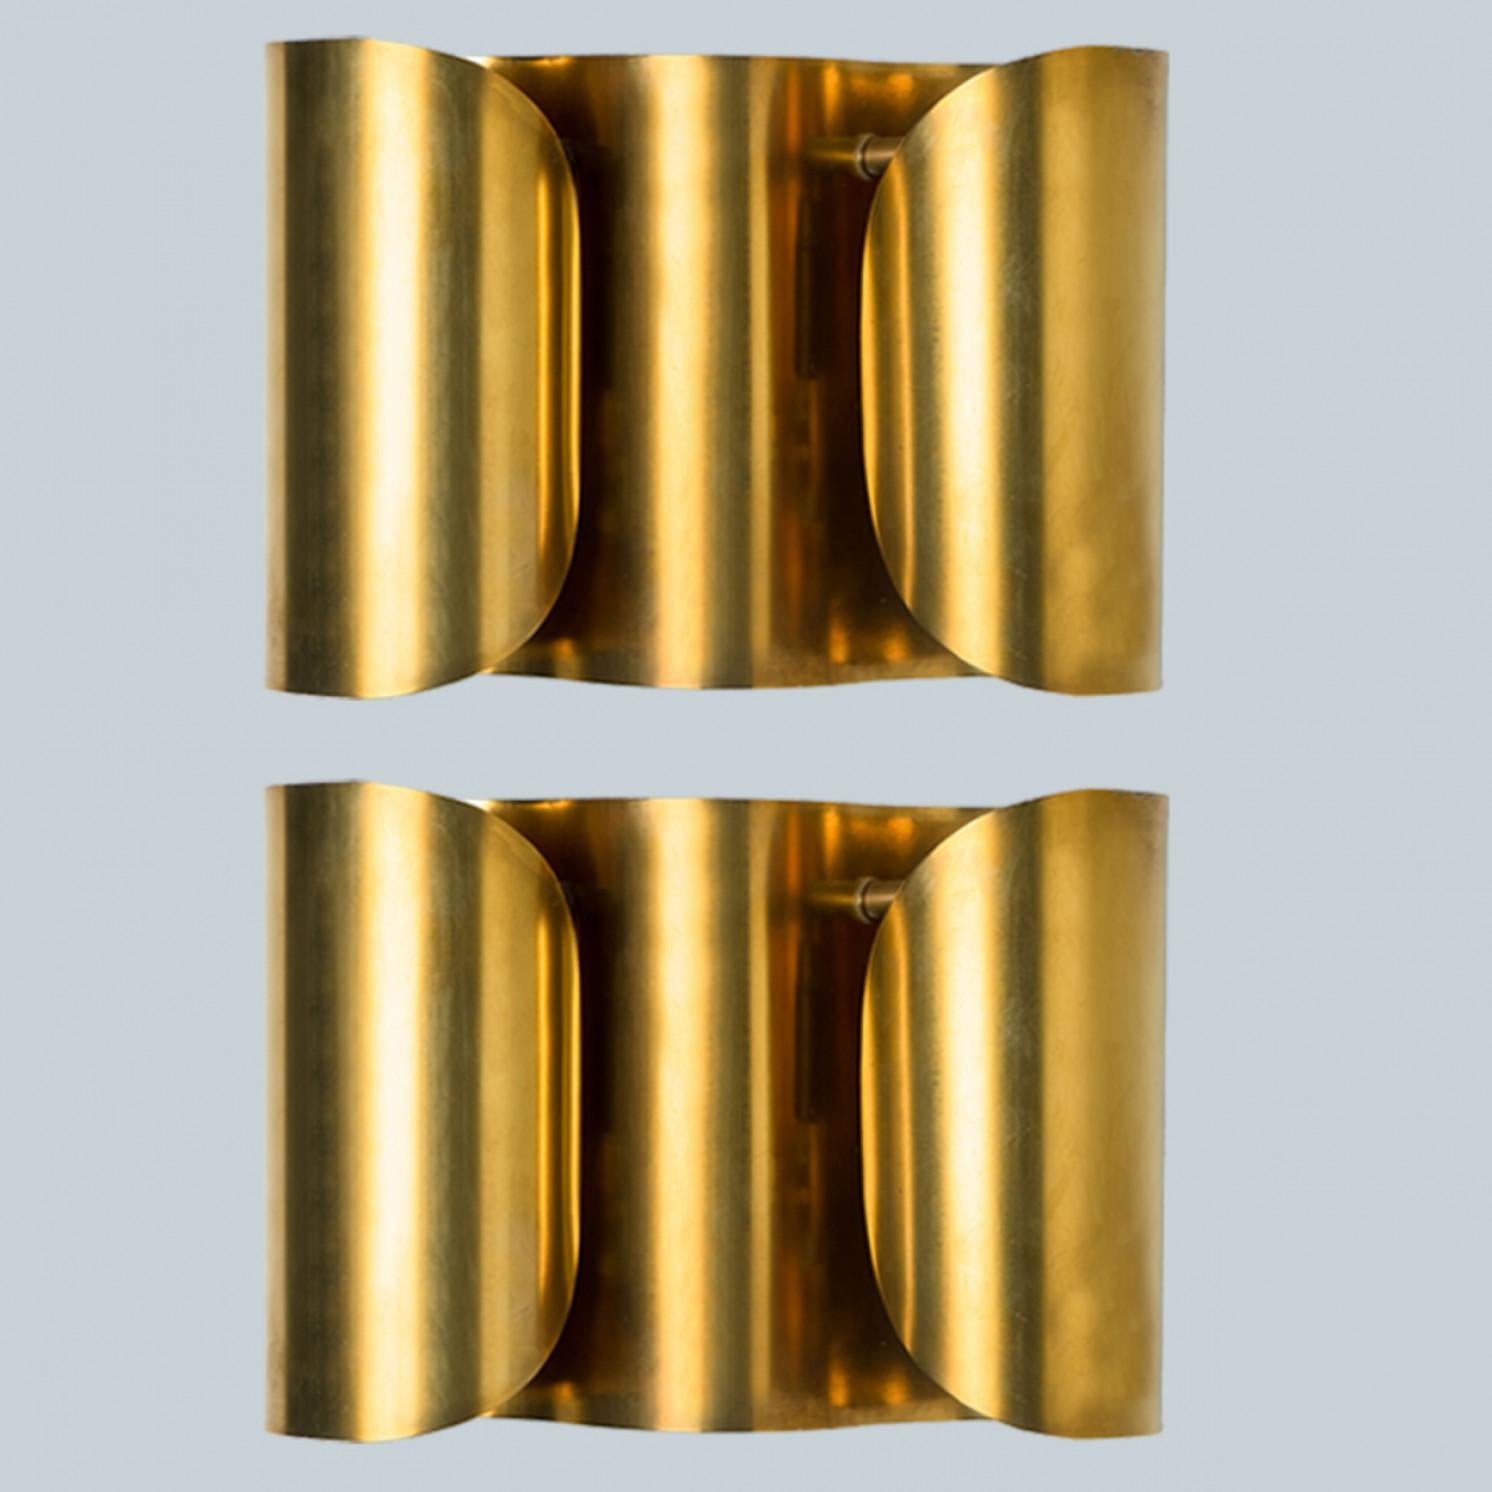 Several Curved Brass Wall Lights, 1970s For Sale 11